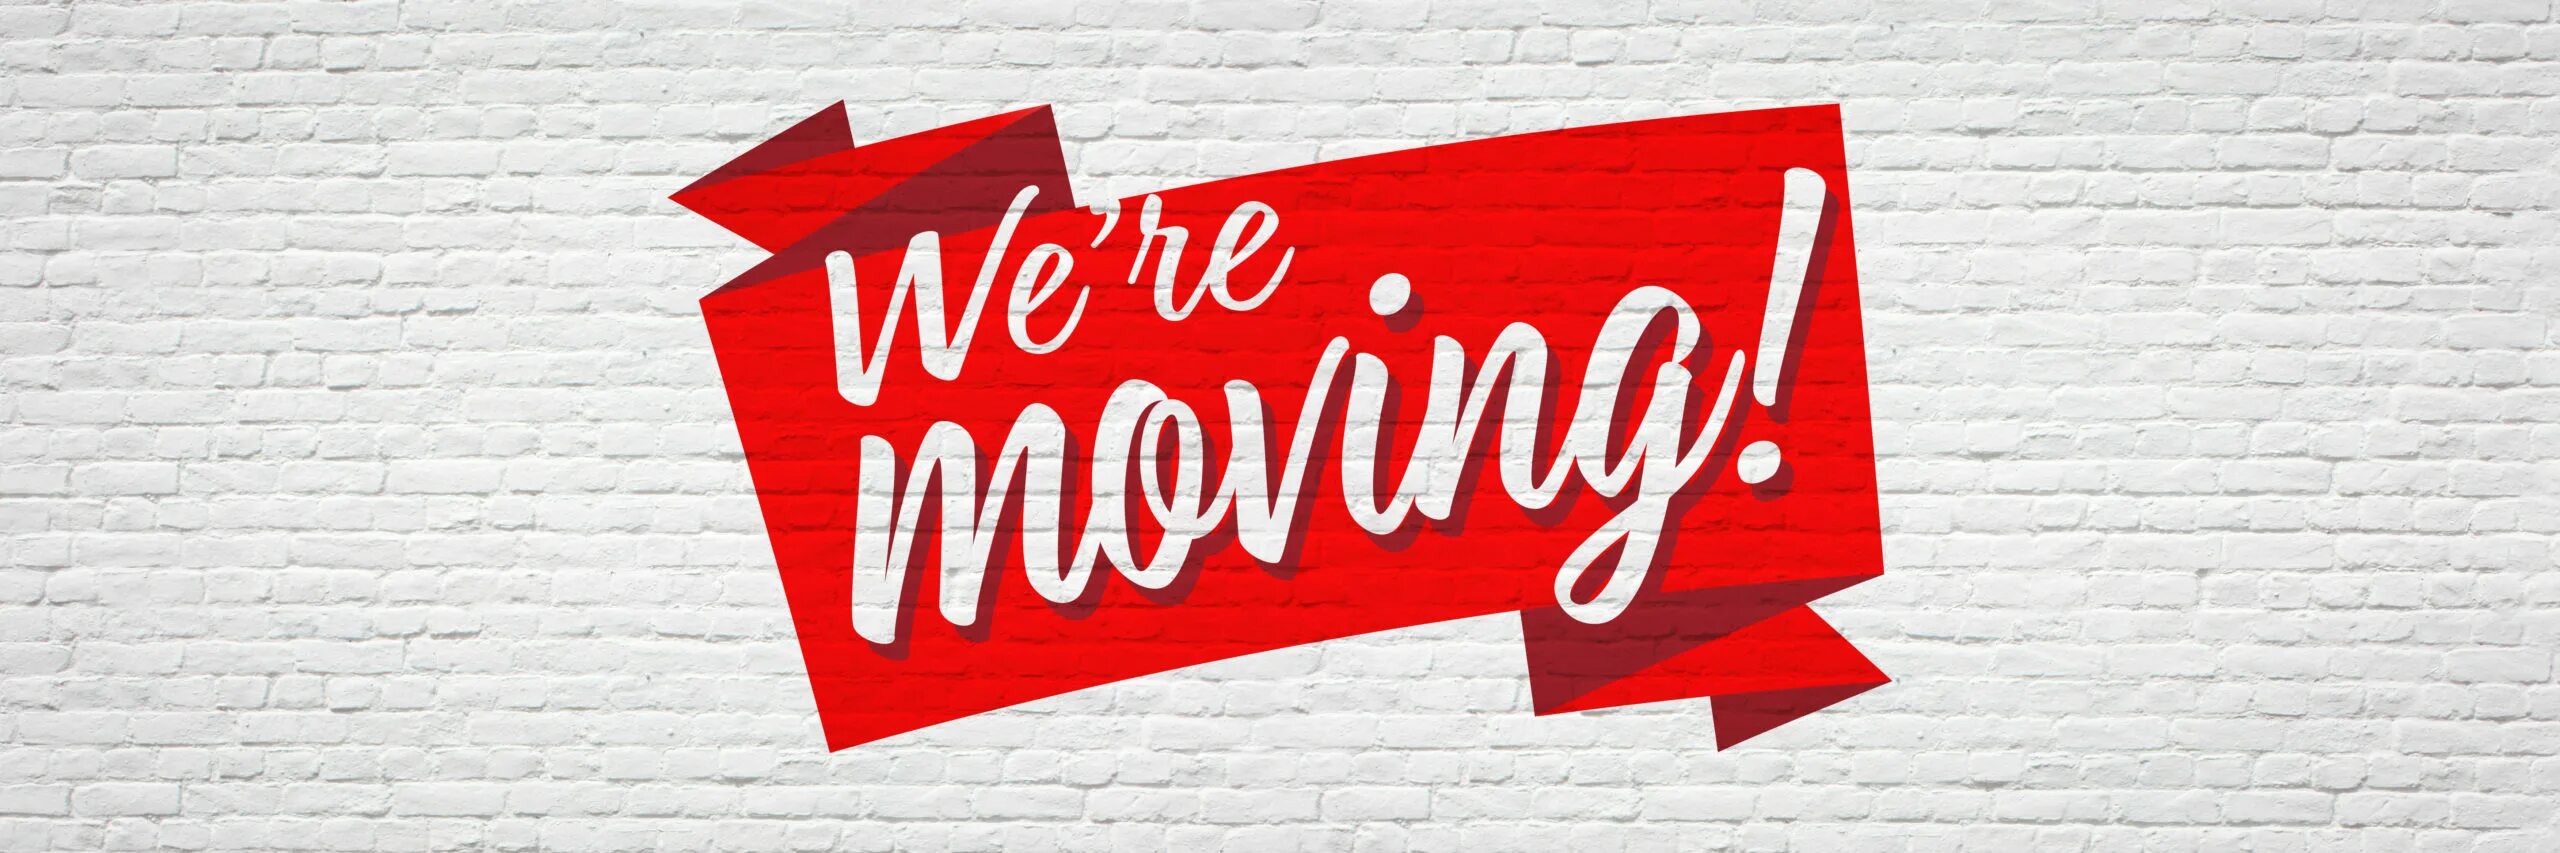 We have moved to a new. We are moving. Moove картинка. Move картинка с надписью. Be moved.